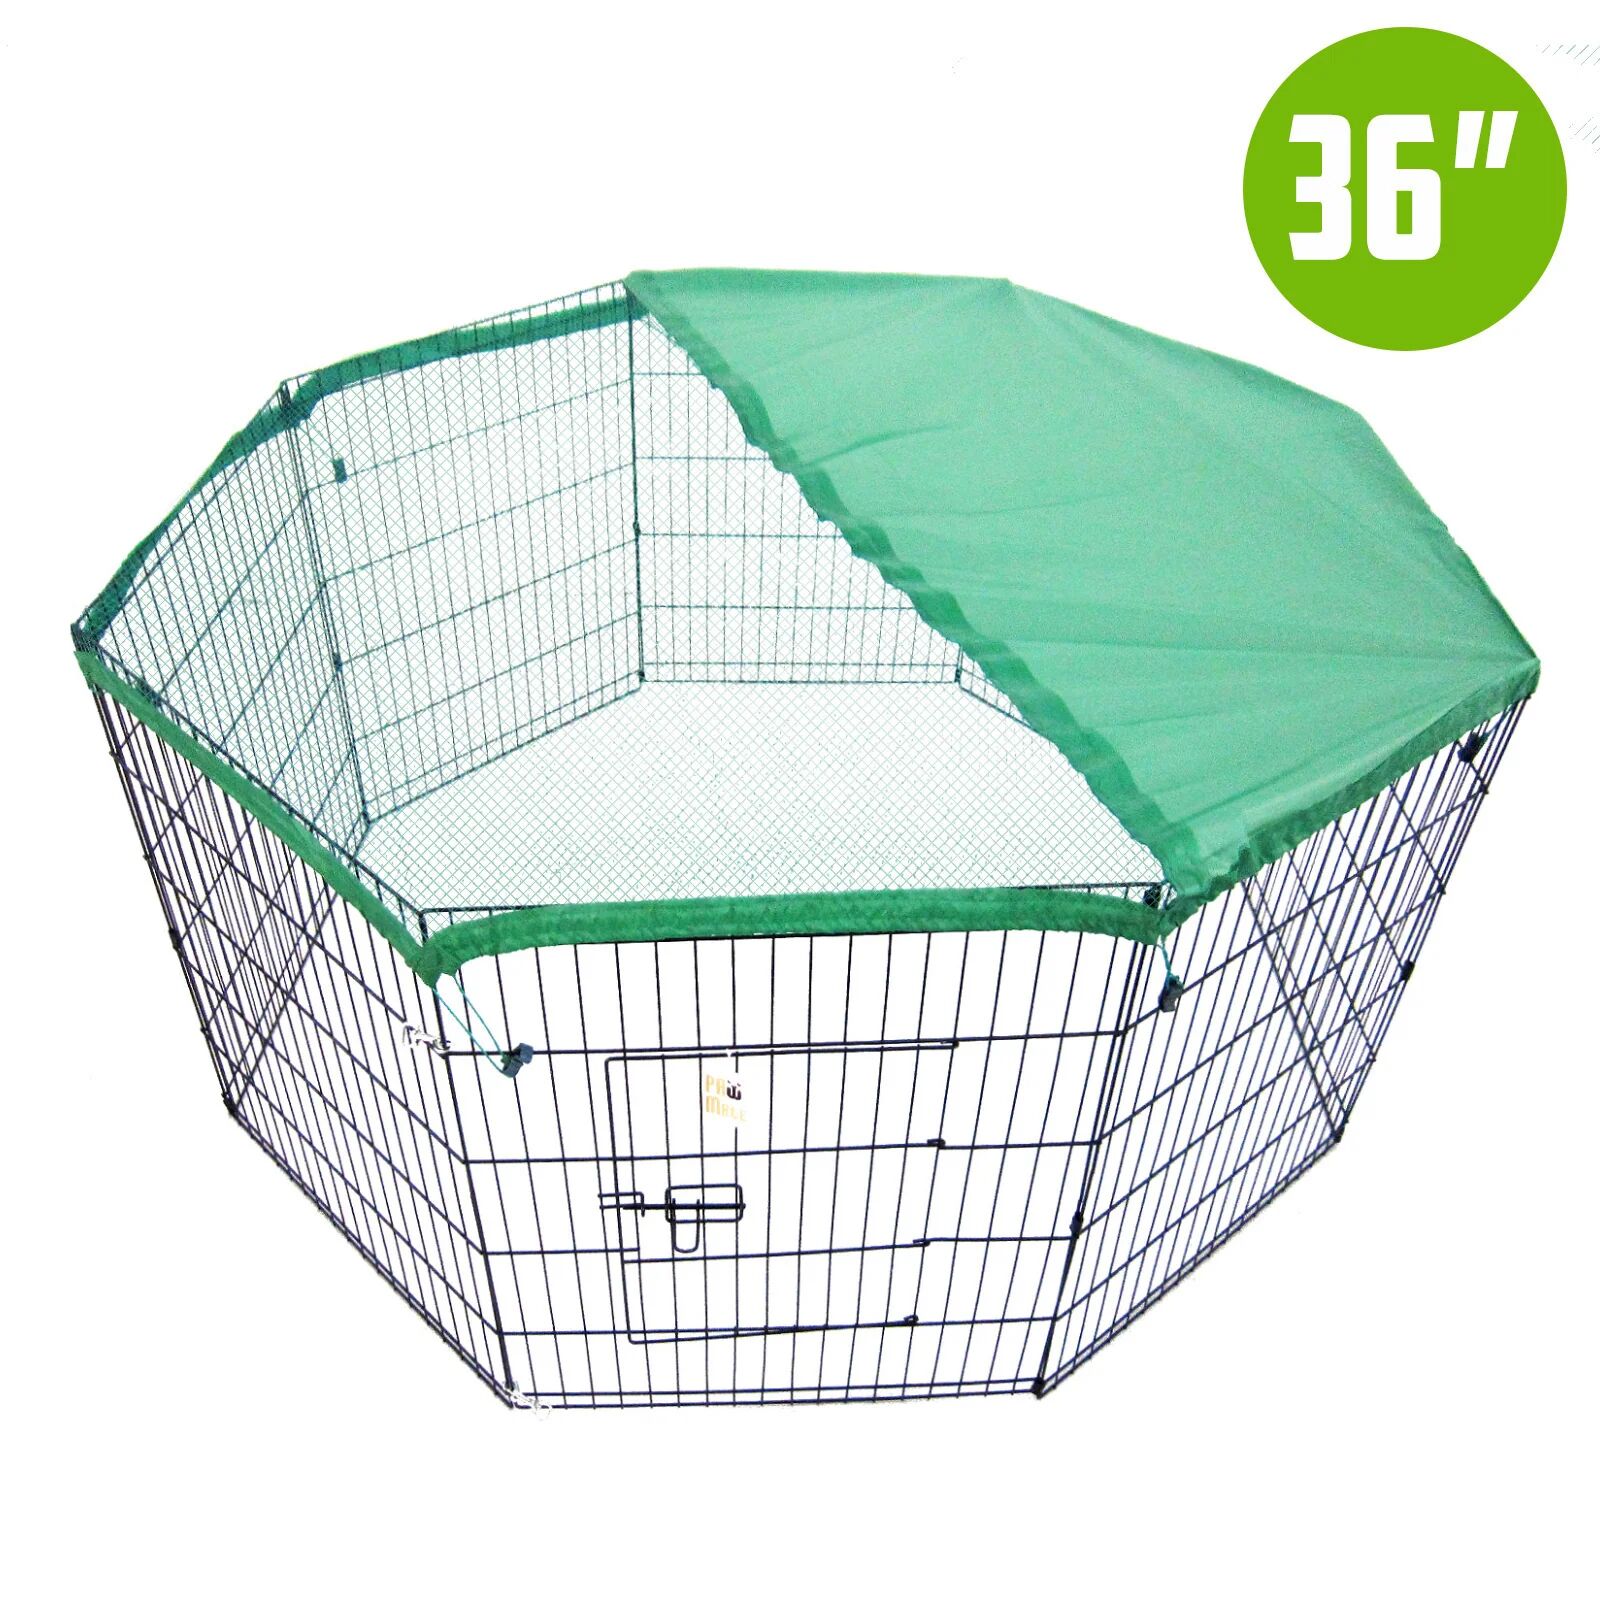 Paw Mate 8 Panel Foldable Pet Playpen 36" W/ Cover - Green